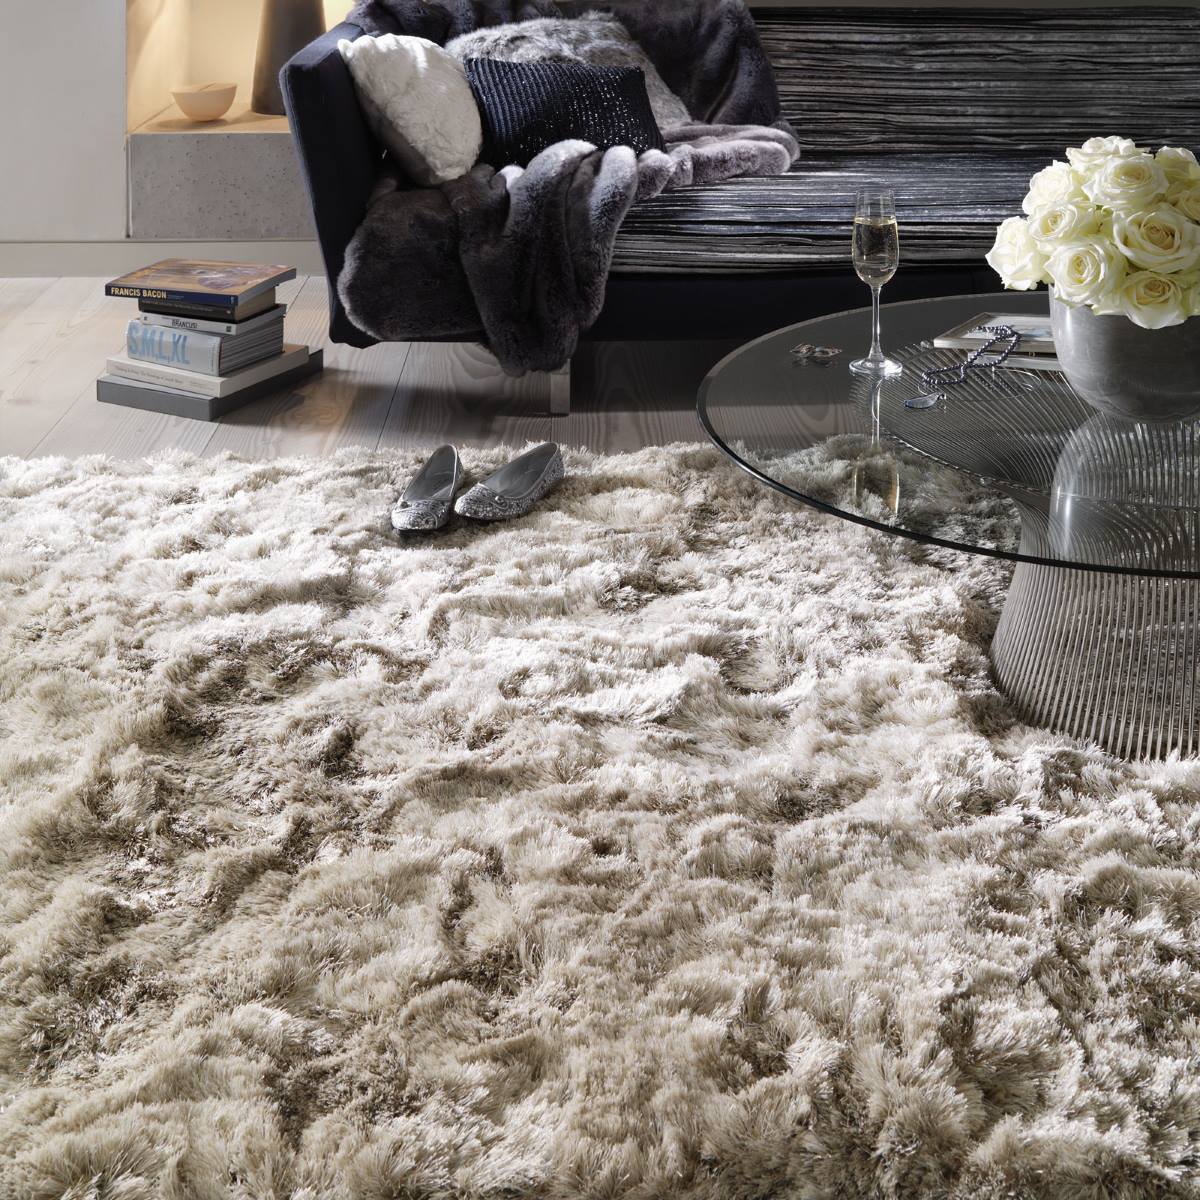 How To Clean A Long Haired Rug